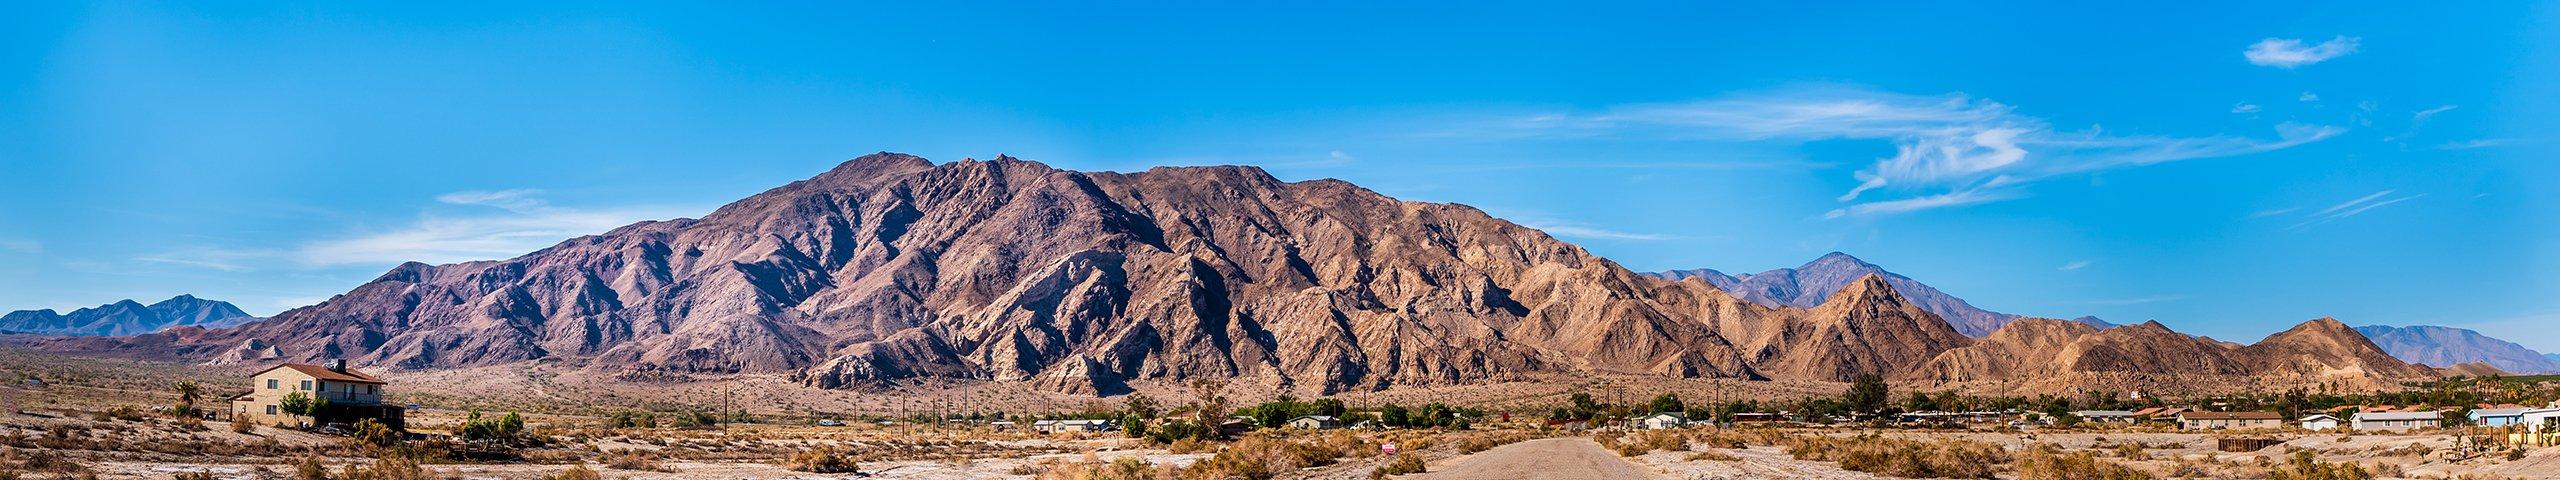 view of mountain in imperial valley california